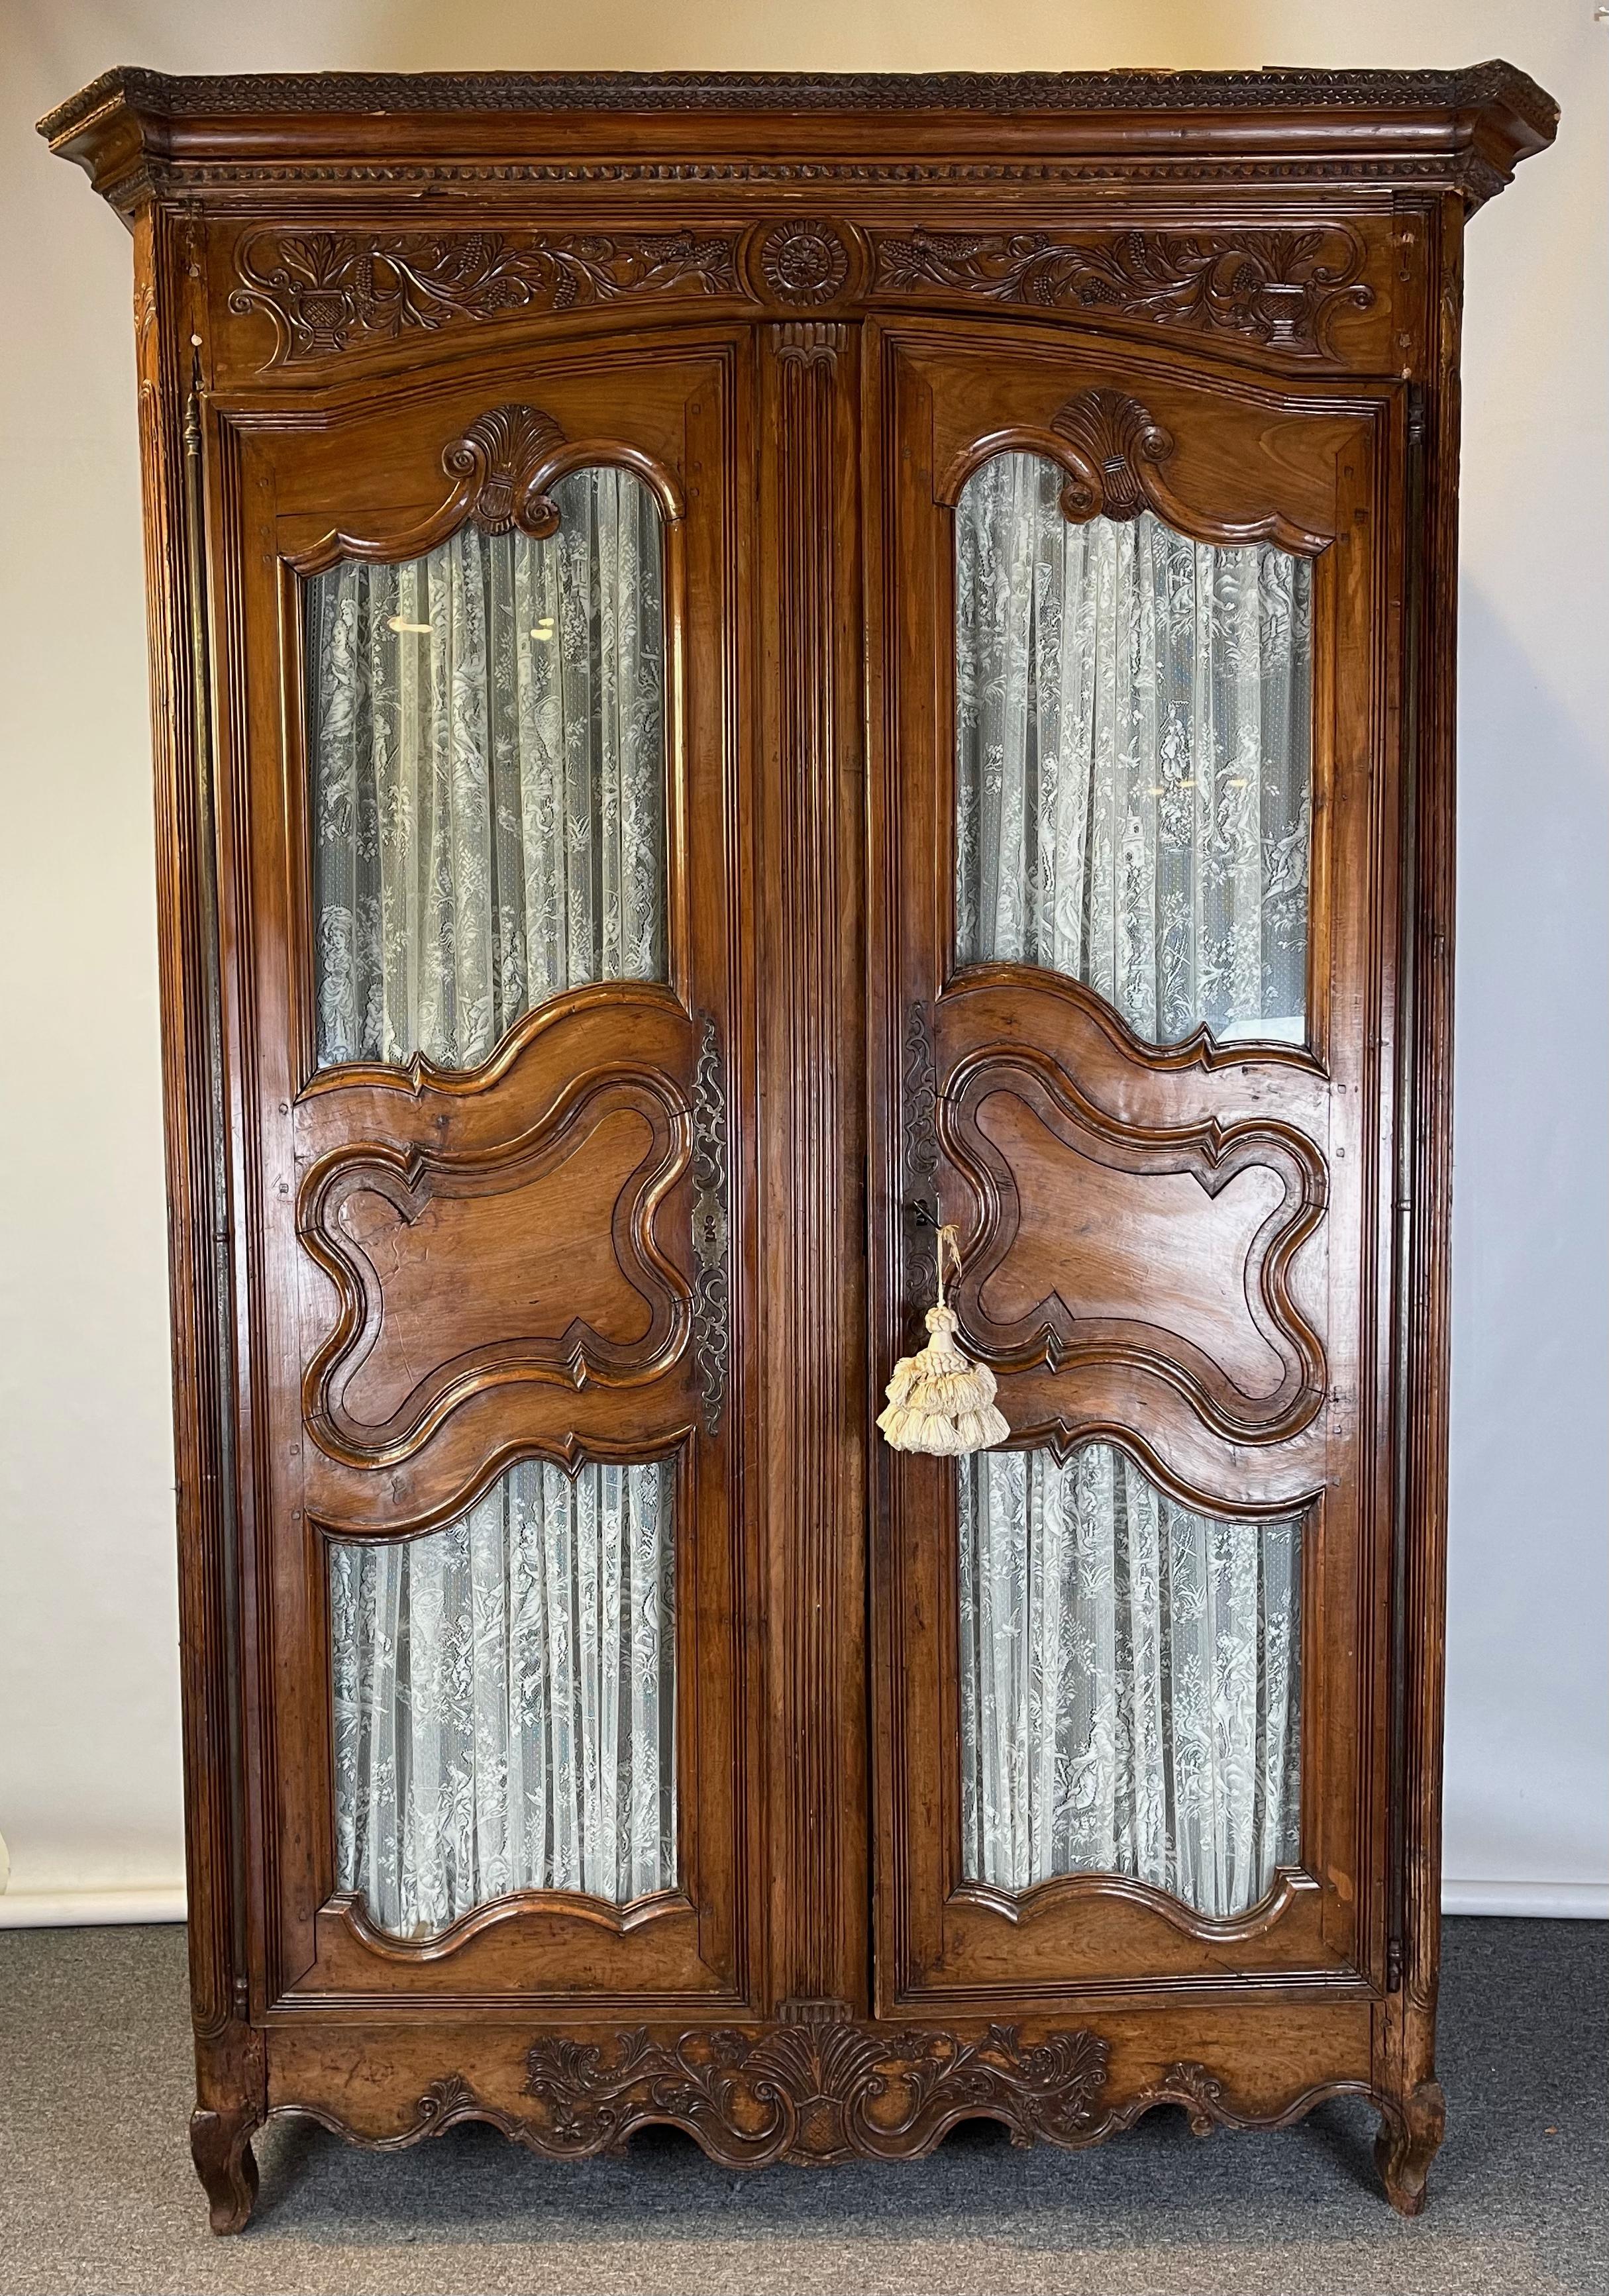 A exceptionally large and intricately carved late 18th C. French fruitwood armoire. The inset glass of the doors is early and most likely original to the piece.